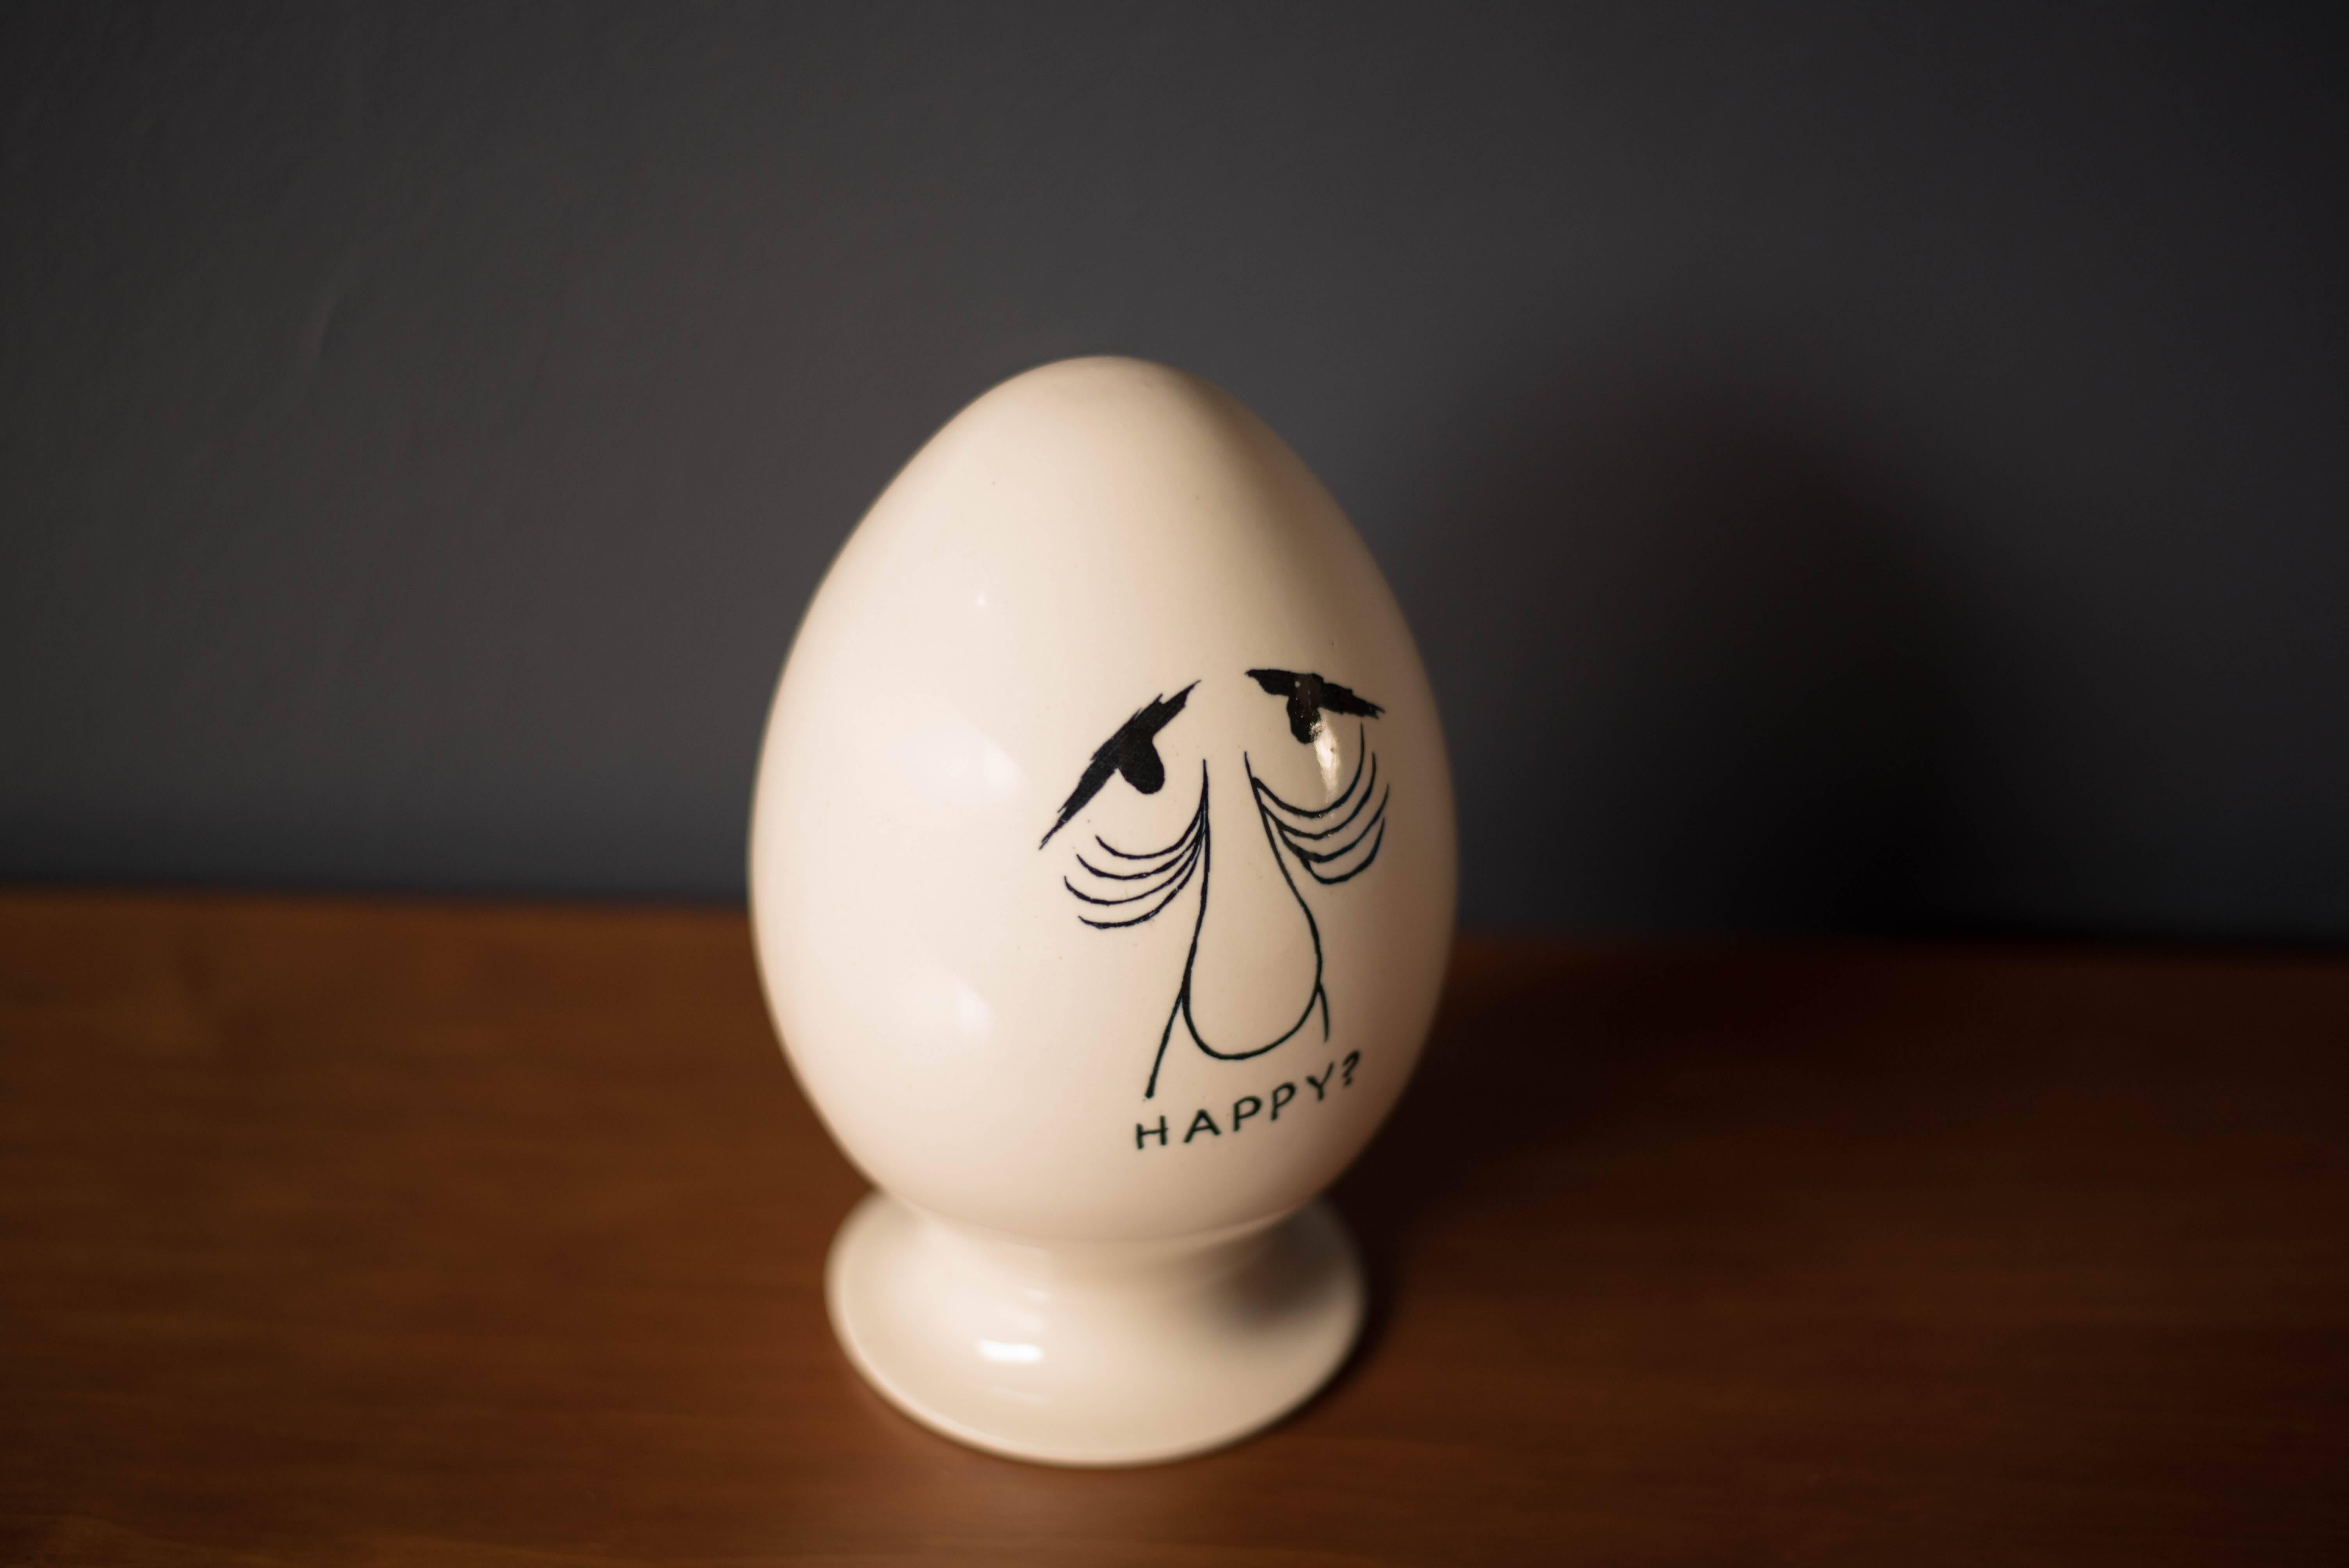 Mid-Century ceramic egghead condom holder designed by Lagardo Tackett. This collectible piece was a mail order item advertised through Playboy Magazine. Signed Tack on the bottom and made in Japan. Does not include cork bottom. 

